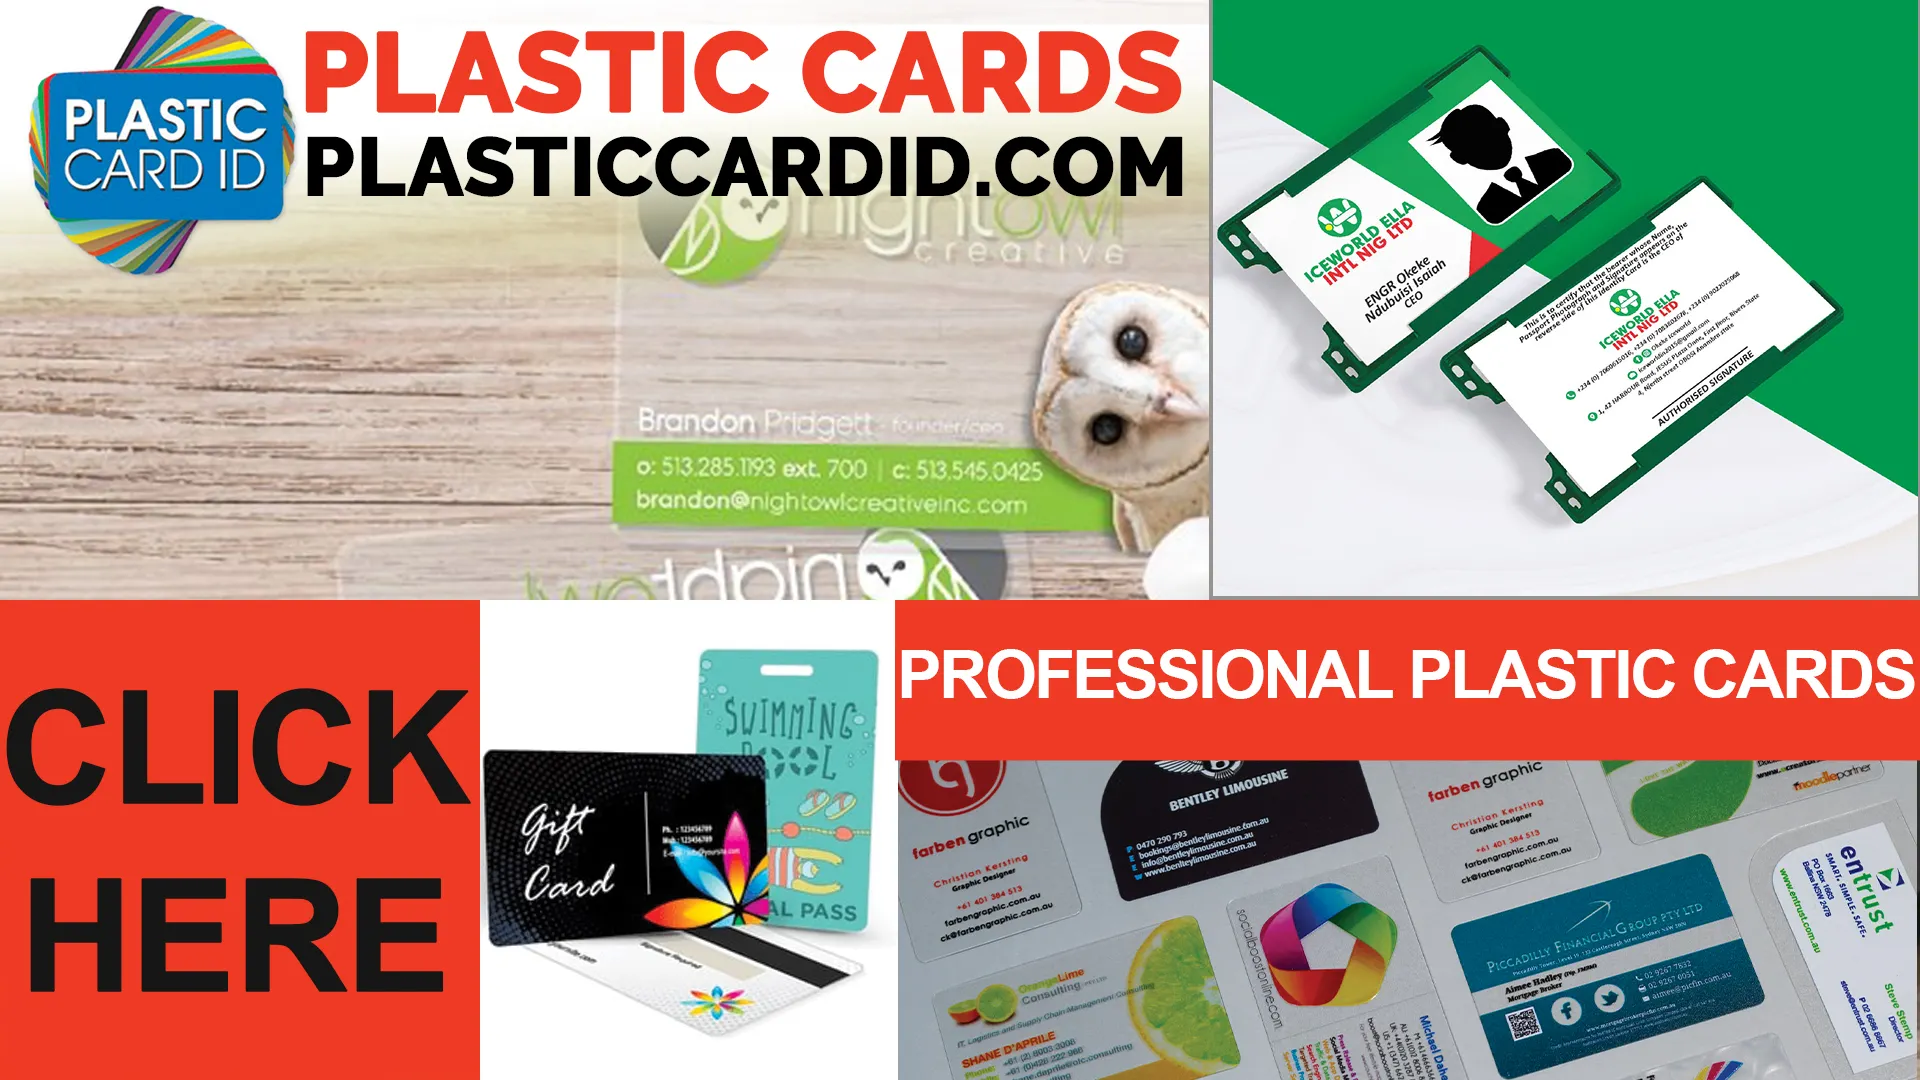 The Power of Plastic Cards: Versatility and Functionality at Your Fingertips